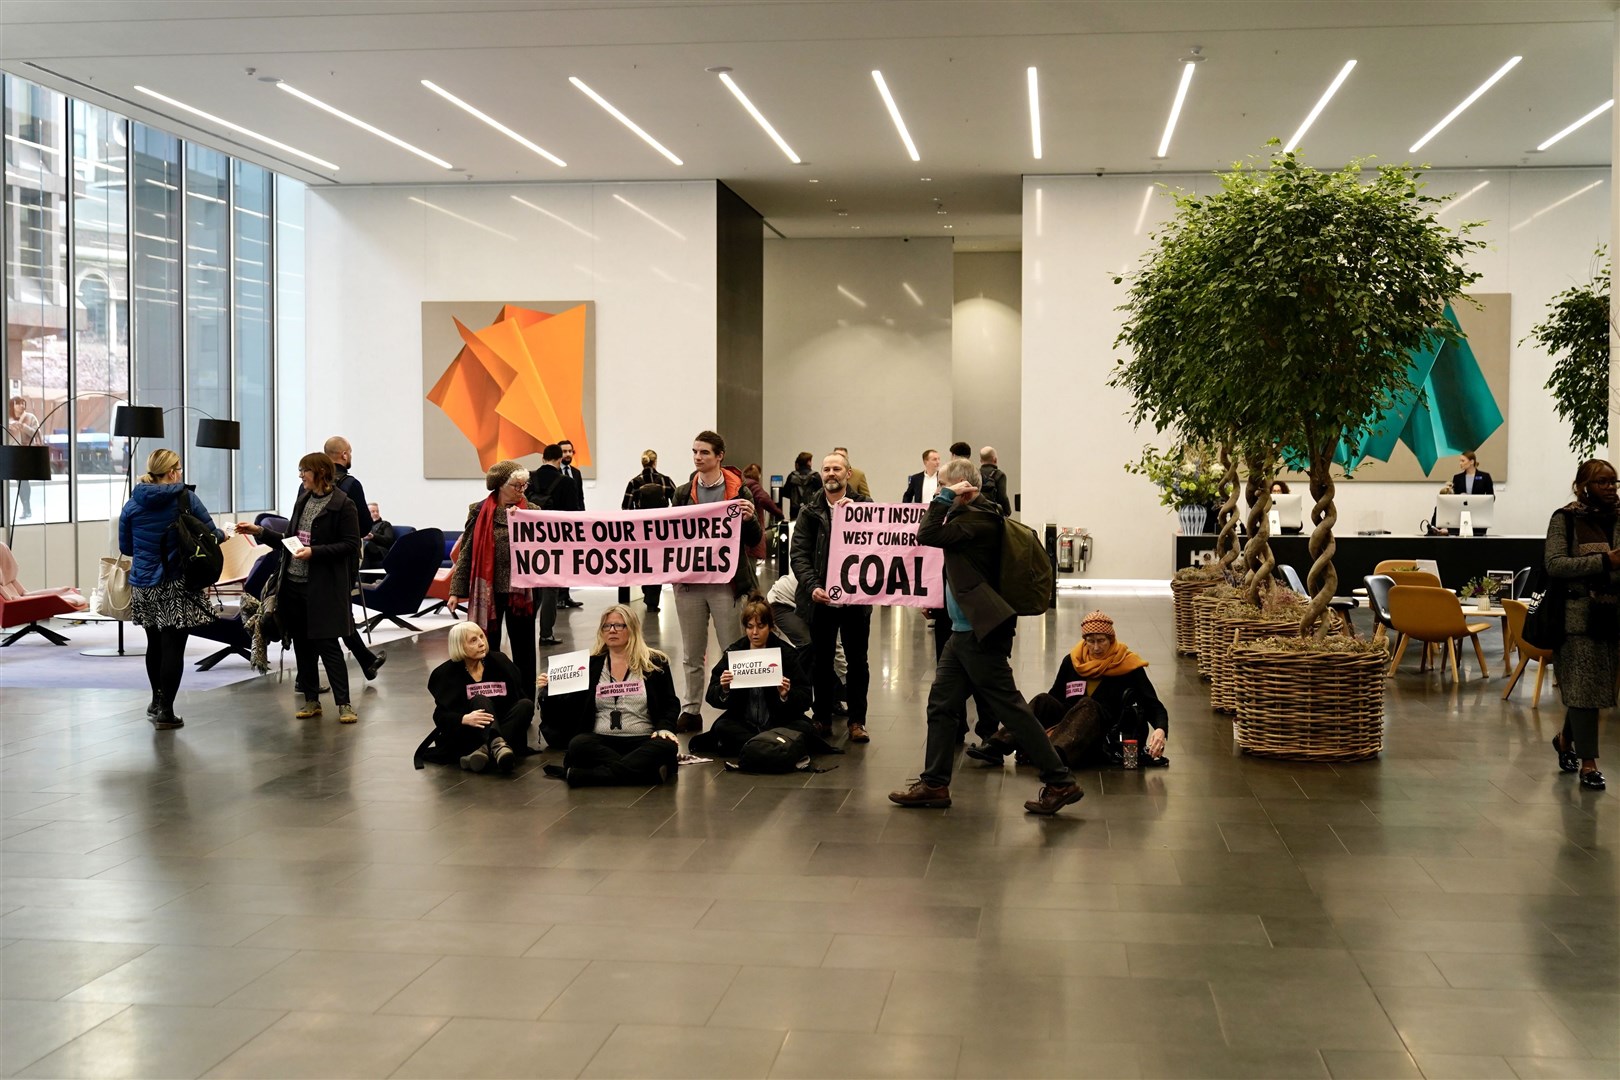 Protesters also targeted the offices of Travellers Insurance (Jonathan Vines/Extinction Rebellion)